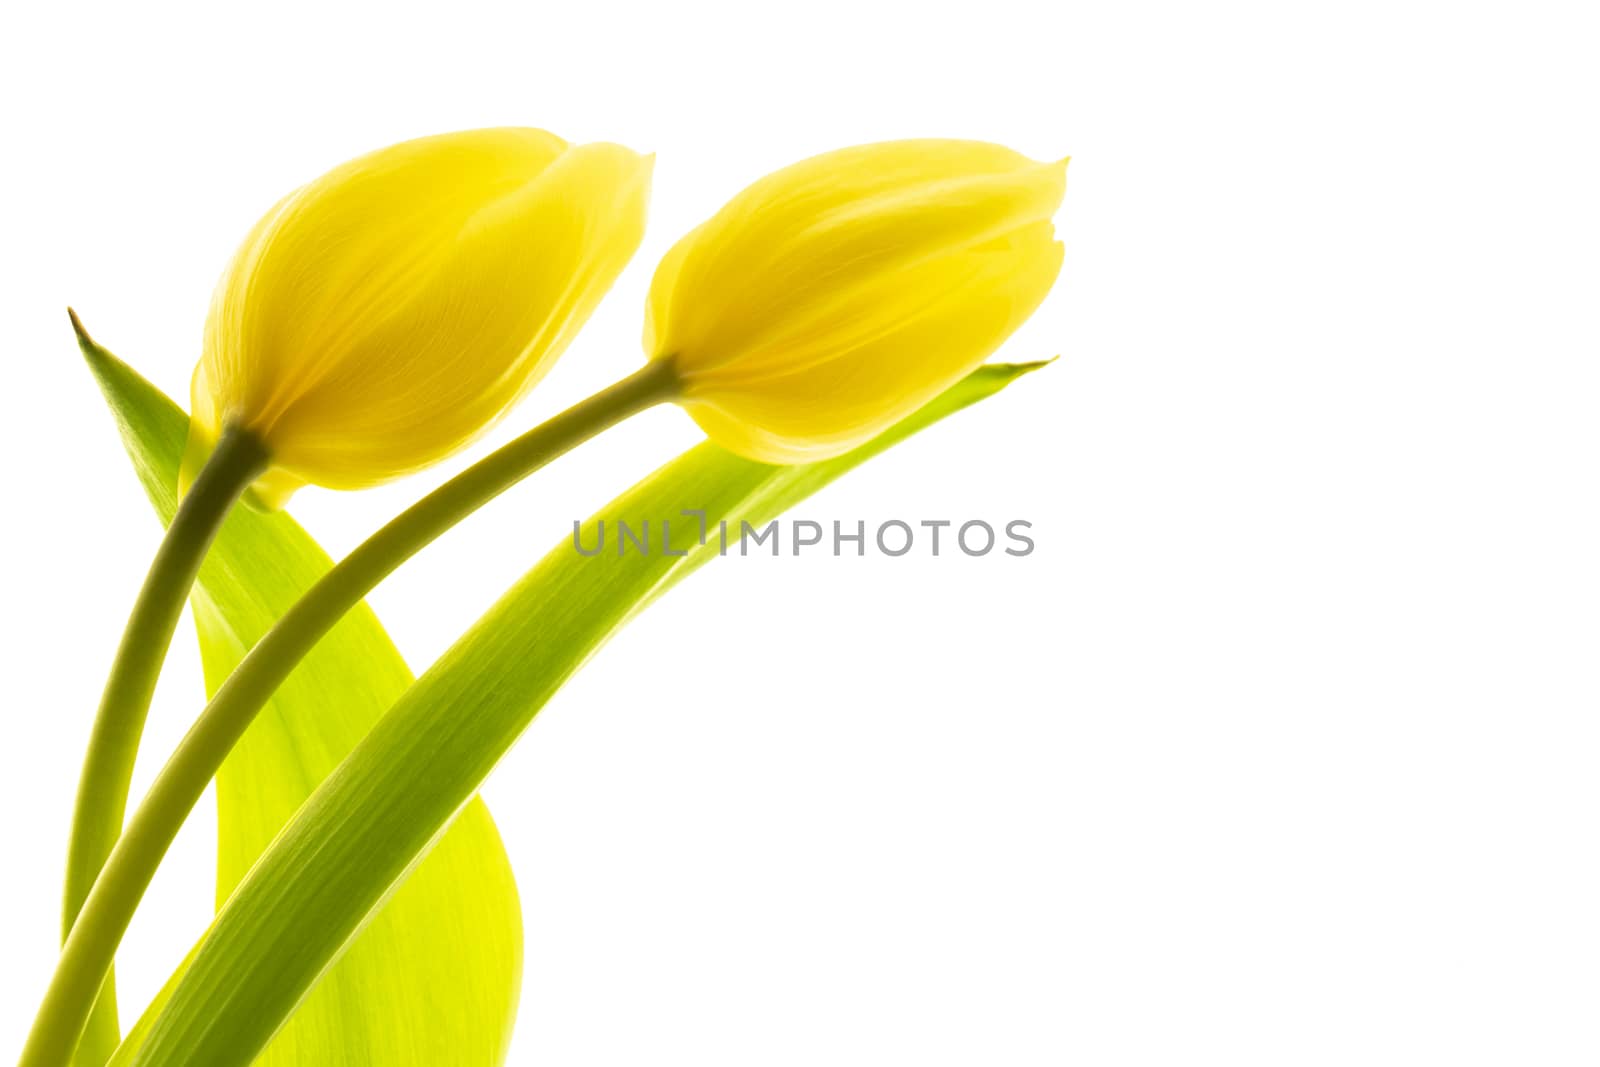 Tulips flower collection isolated on white background.